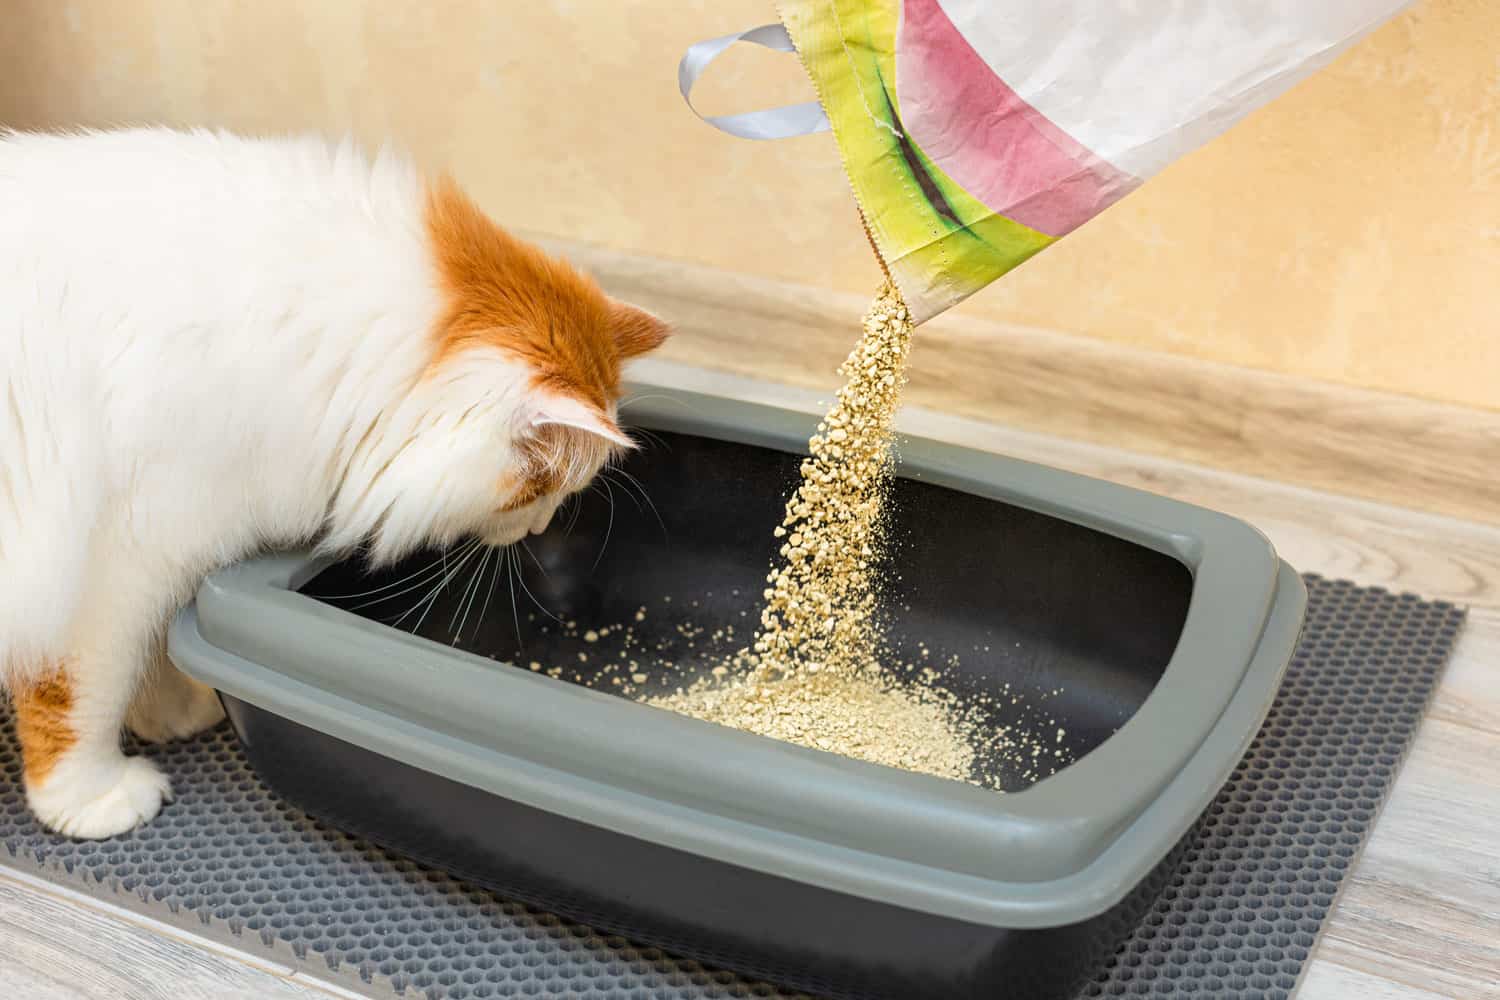 Owner pouring cat litter and cat watching him do it